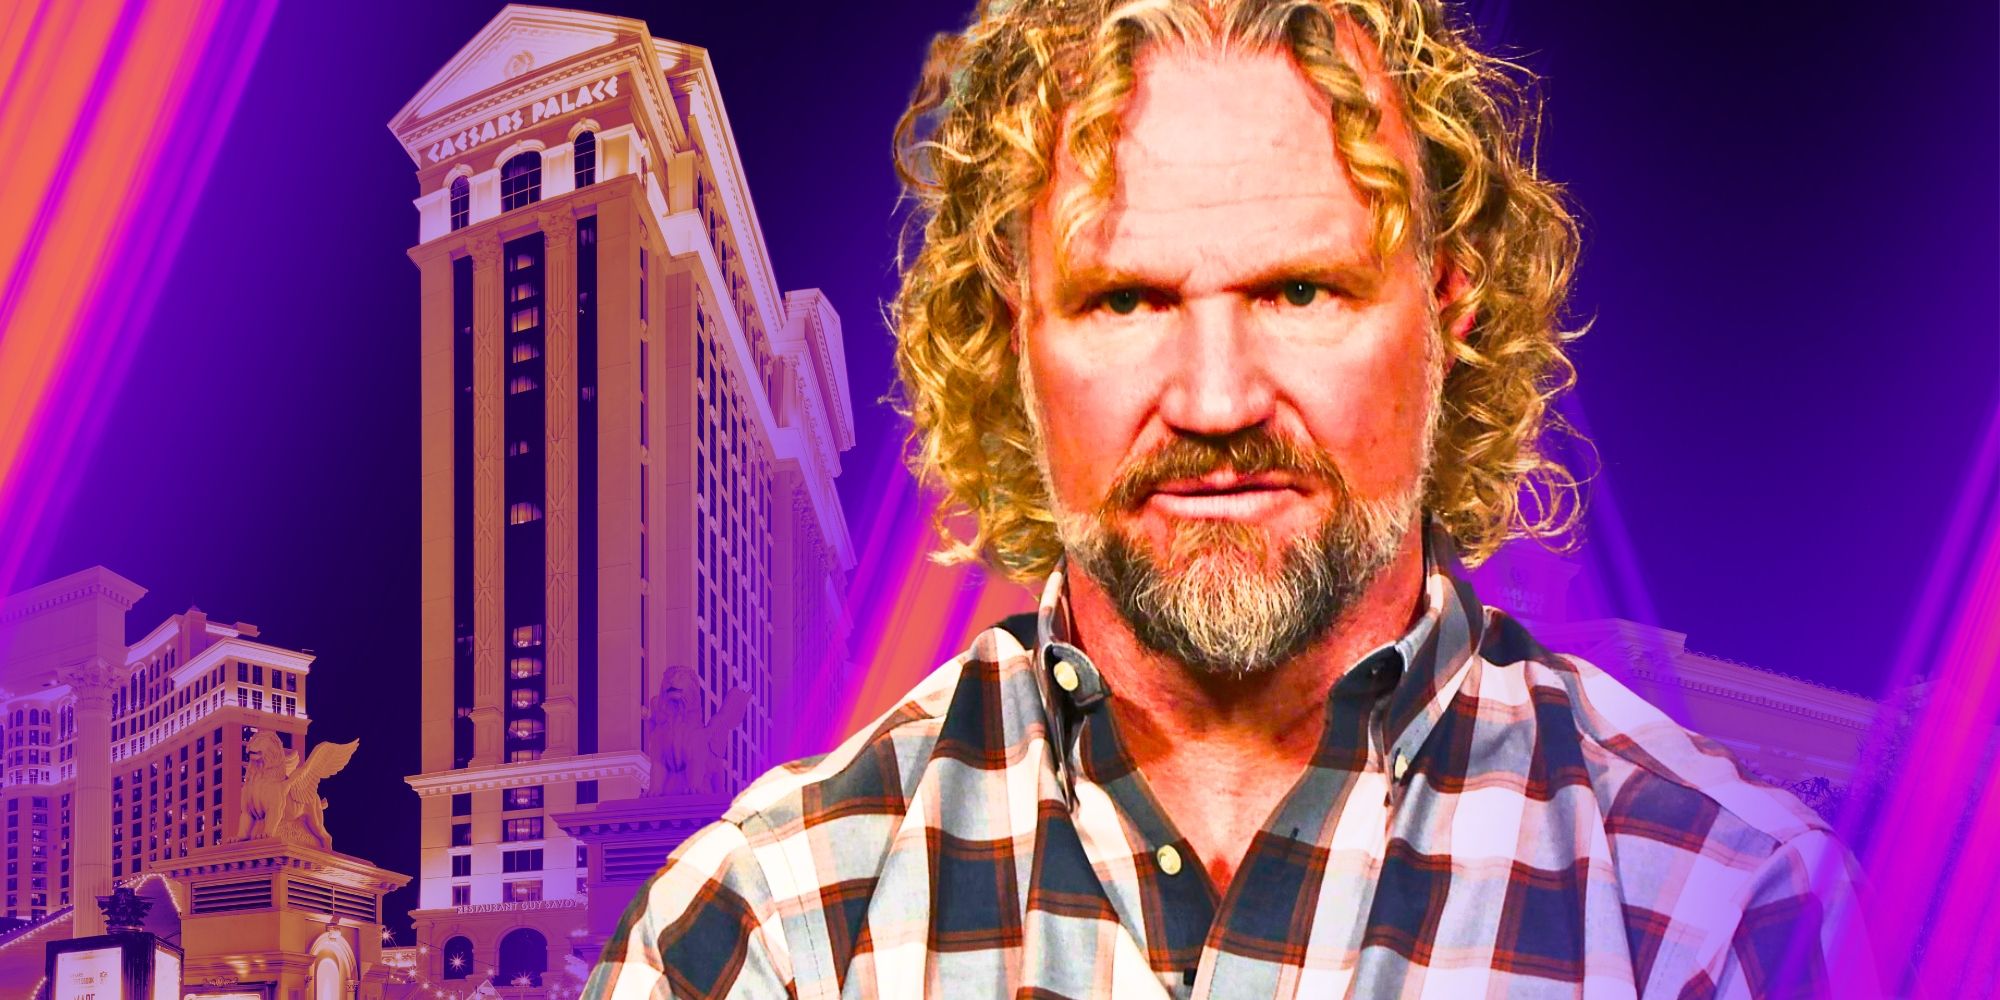 Sister Wives montage, Kody Brown with Caesar's palace building in the purple background